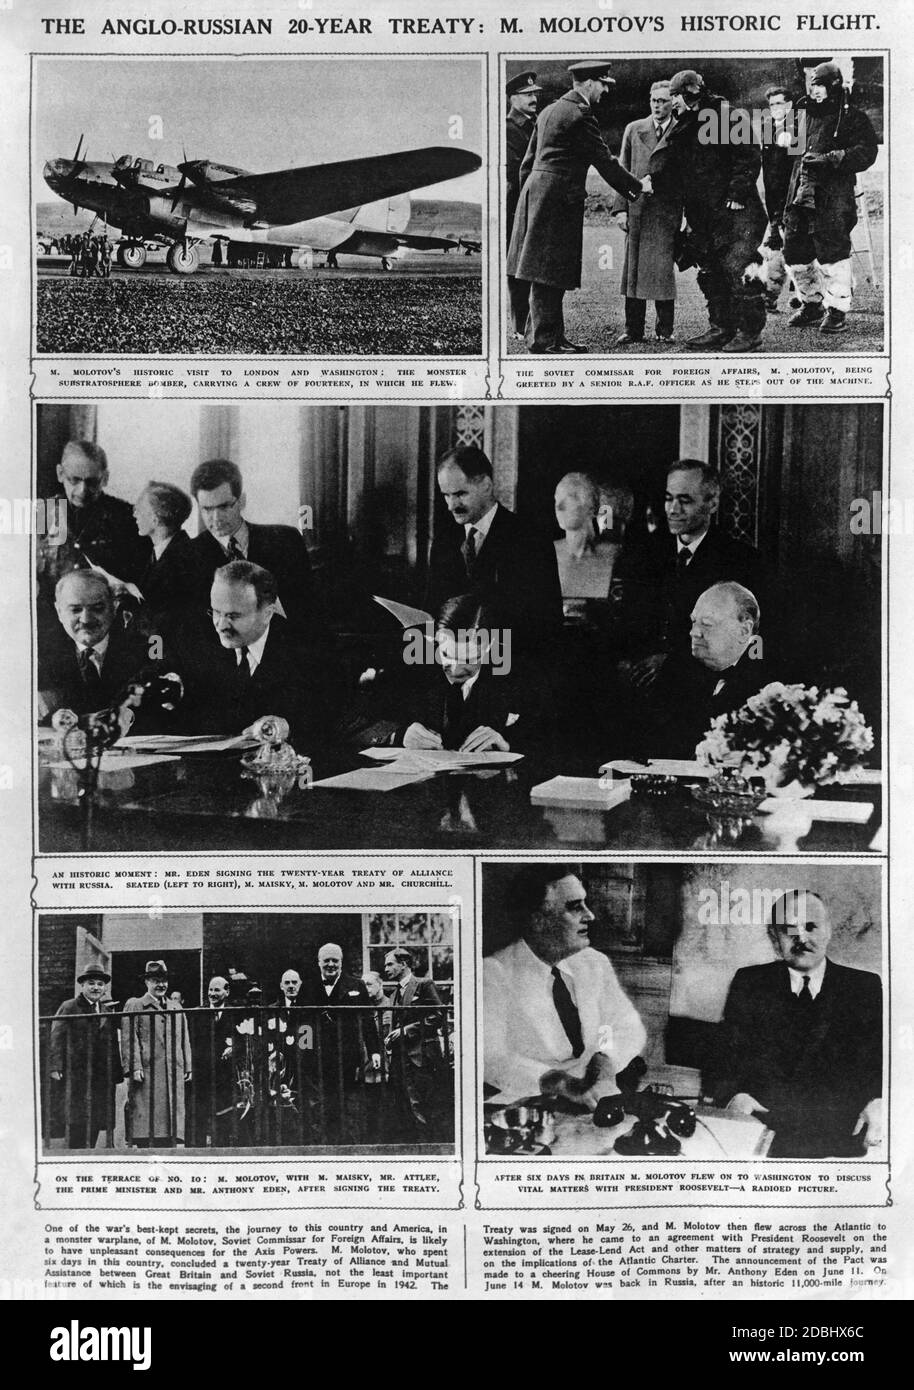 Upper left: Molotov's plane, upper right: Molotov is welcomed at the airfield by a British Air Force officer, in the middle: Maisky, Molotov, Attlee and Churchill signing the 20-year peace treaty between the Soviet Union and Great Britain as part of the anti-Hitler coalition. Below left: Maisky, Molotov, Attlee, Churchill and Eden on the balcony of Downing Street 10, below right: Roosevelt and Molotov before the latter's departure for Moscow. Stock Photo